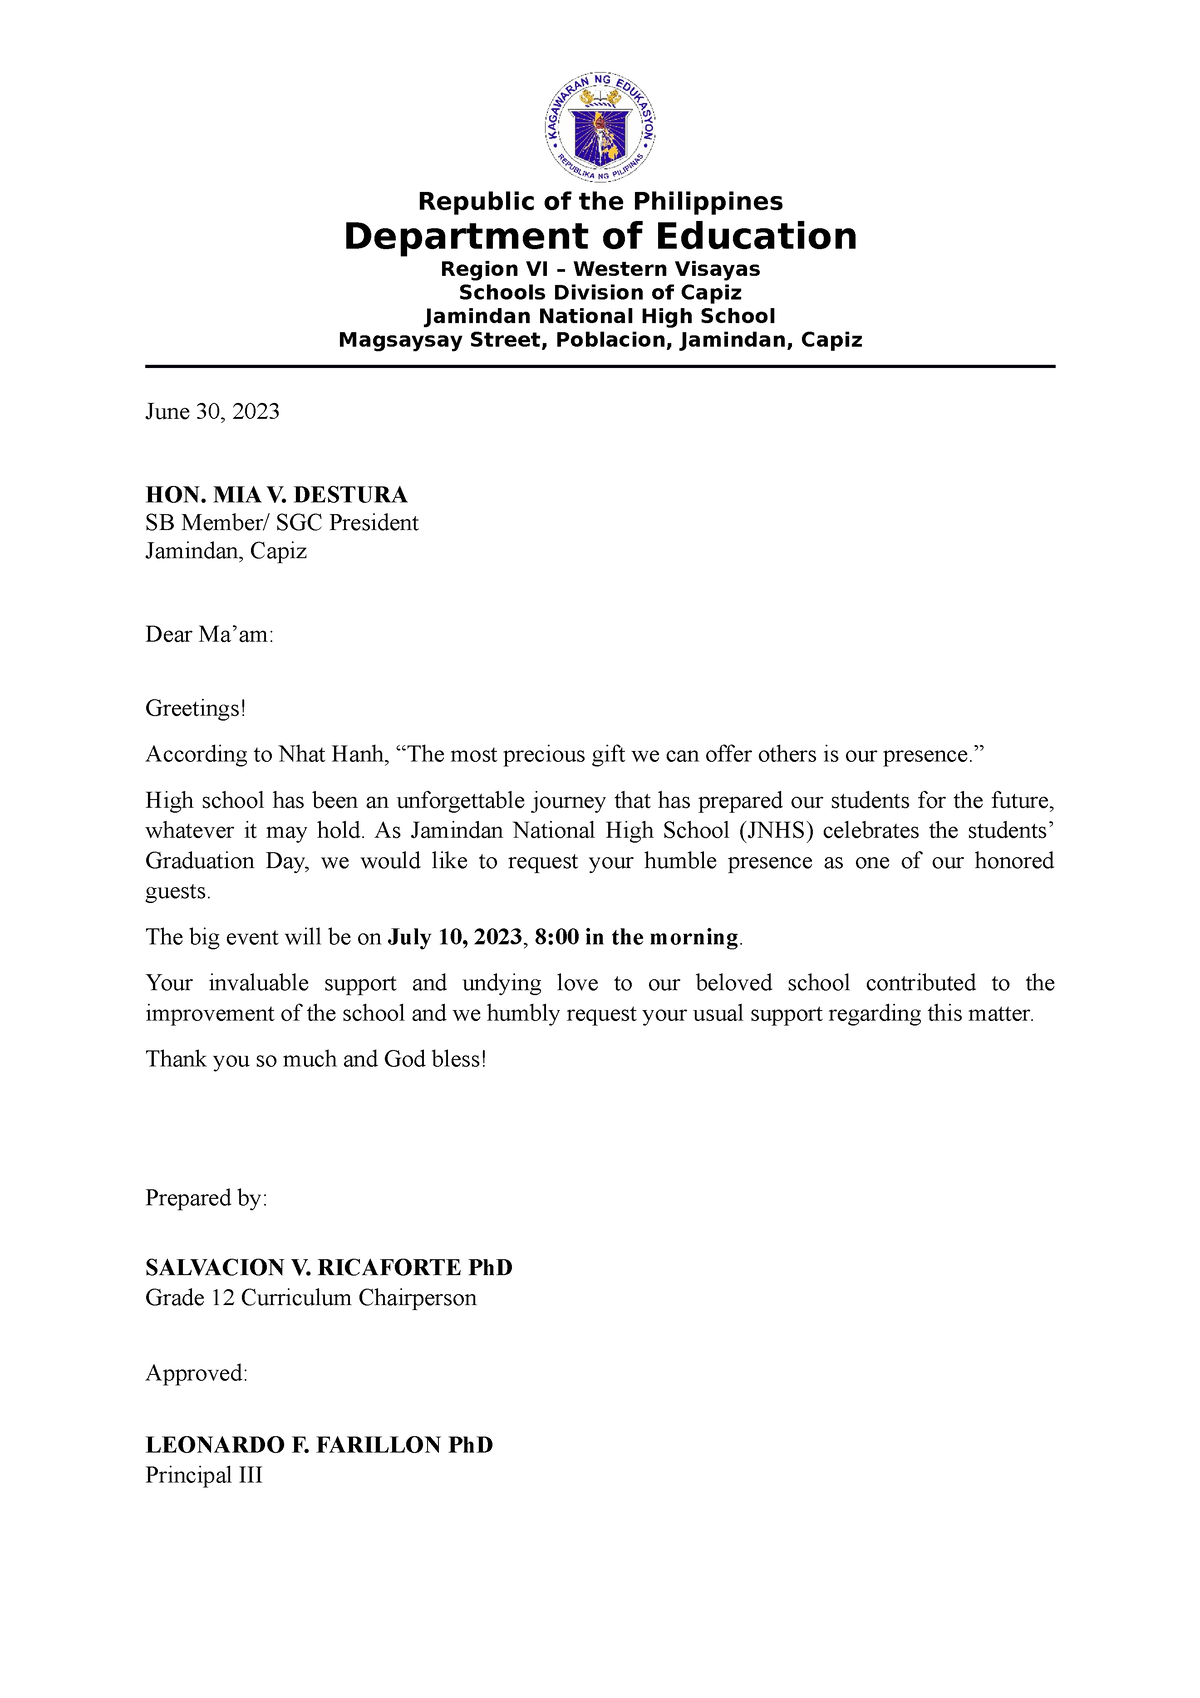 Letter for Graduation Guests - Republic of the Philippines Department ...